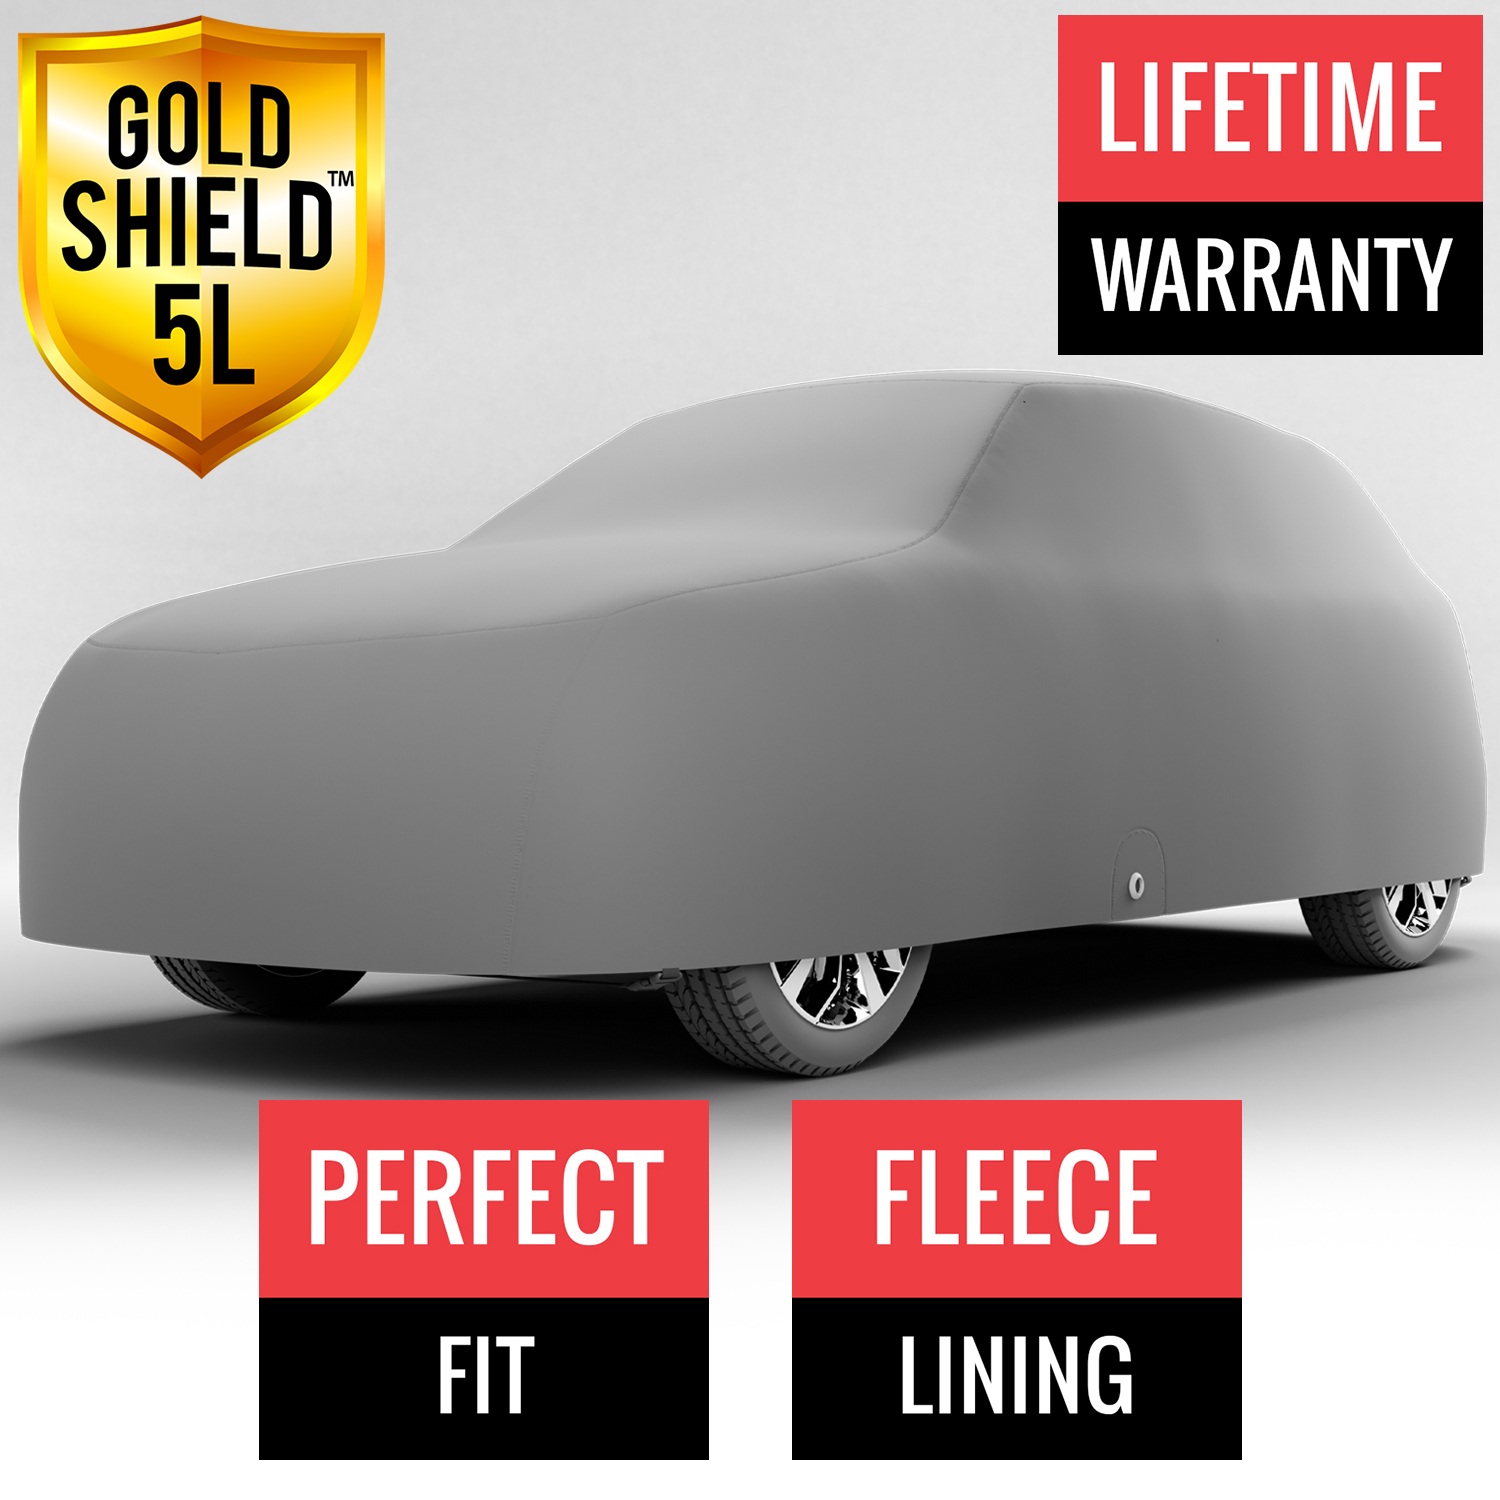 Gold Shield 5L - Car Cover for Plymouth Voyager 1992 Van